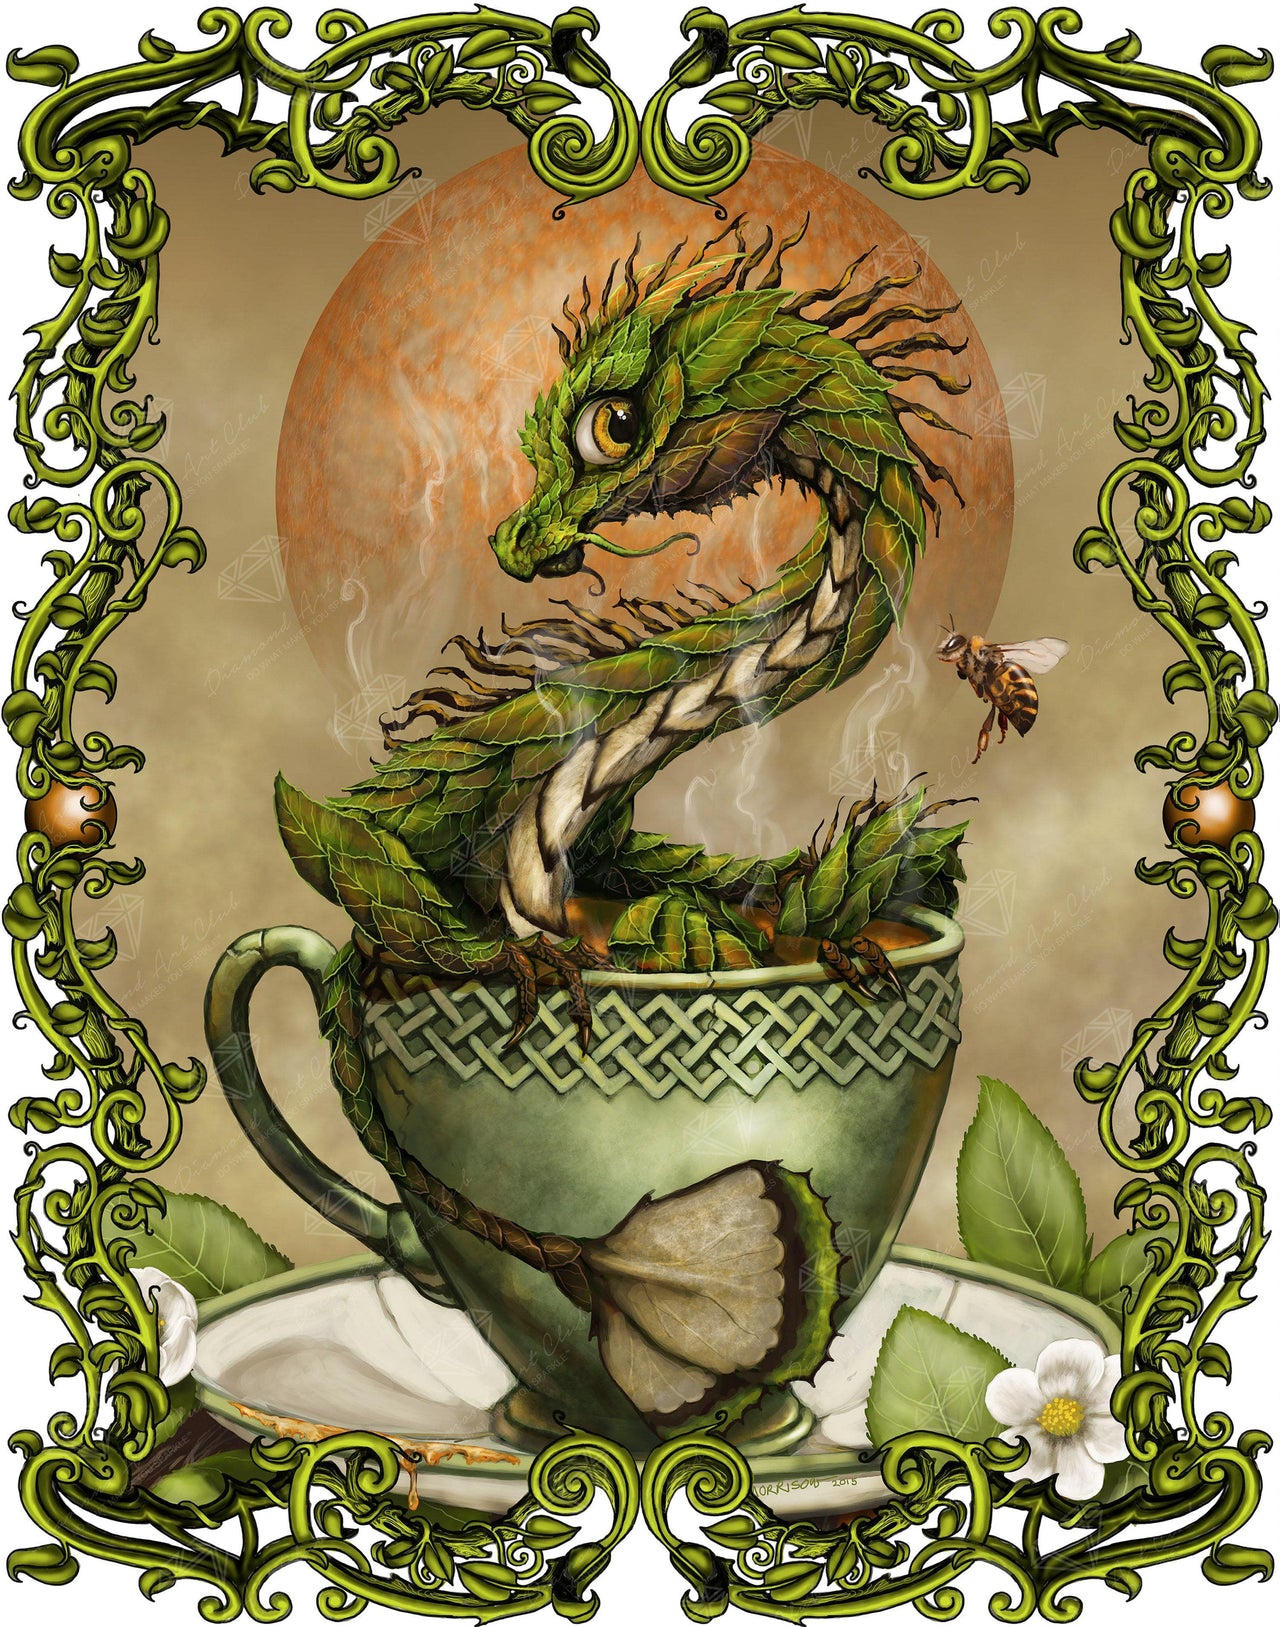 Diamond Painting Tea Dragon 27.6" x 35" (70cm x 89cm) / Square with 37 Colors including 2 ABs / 99,680